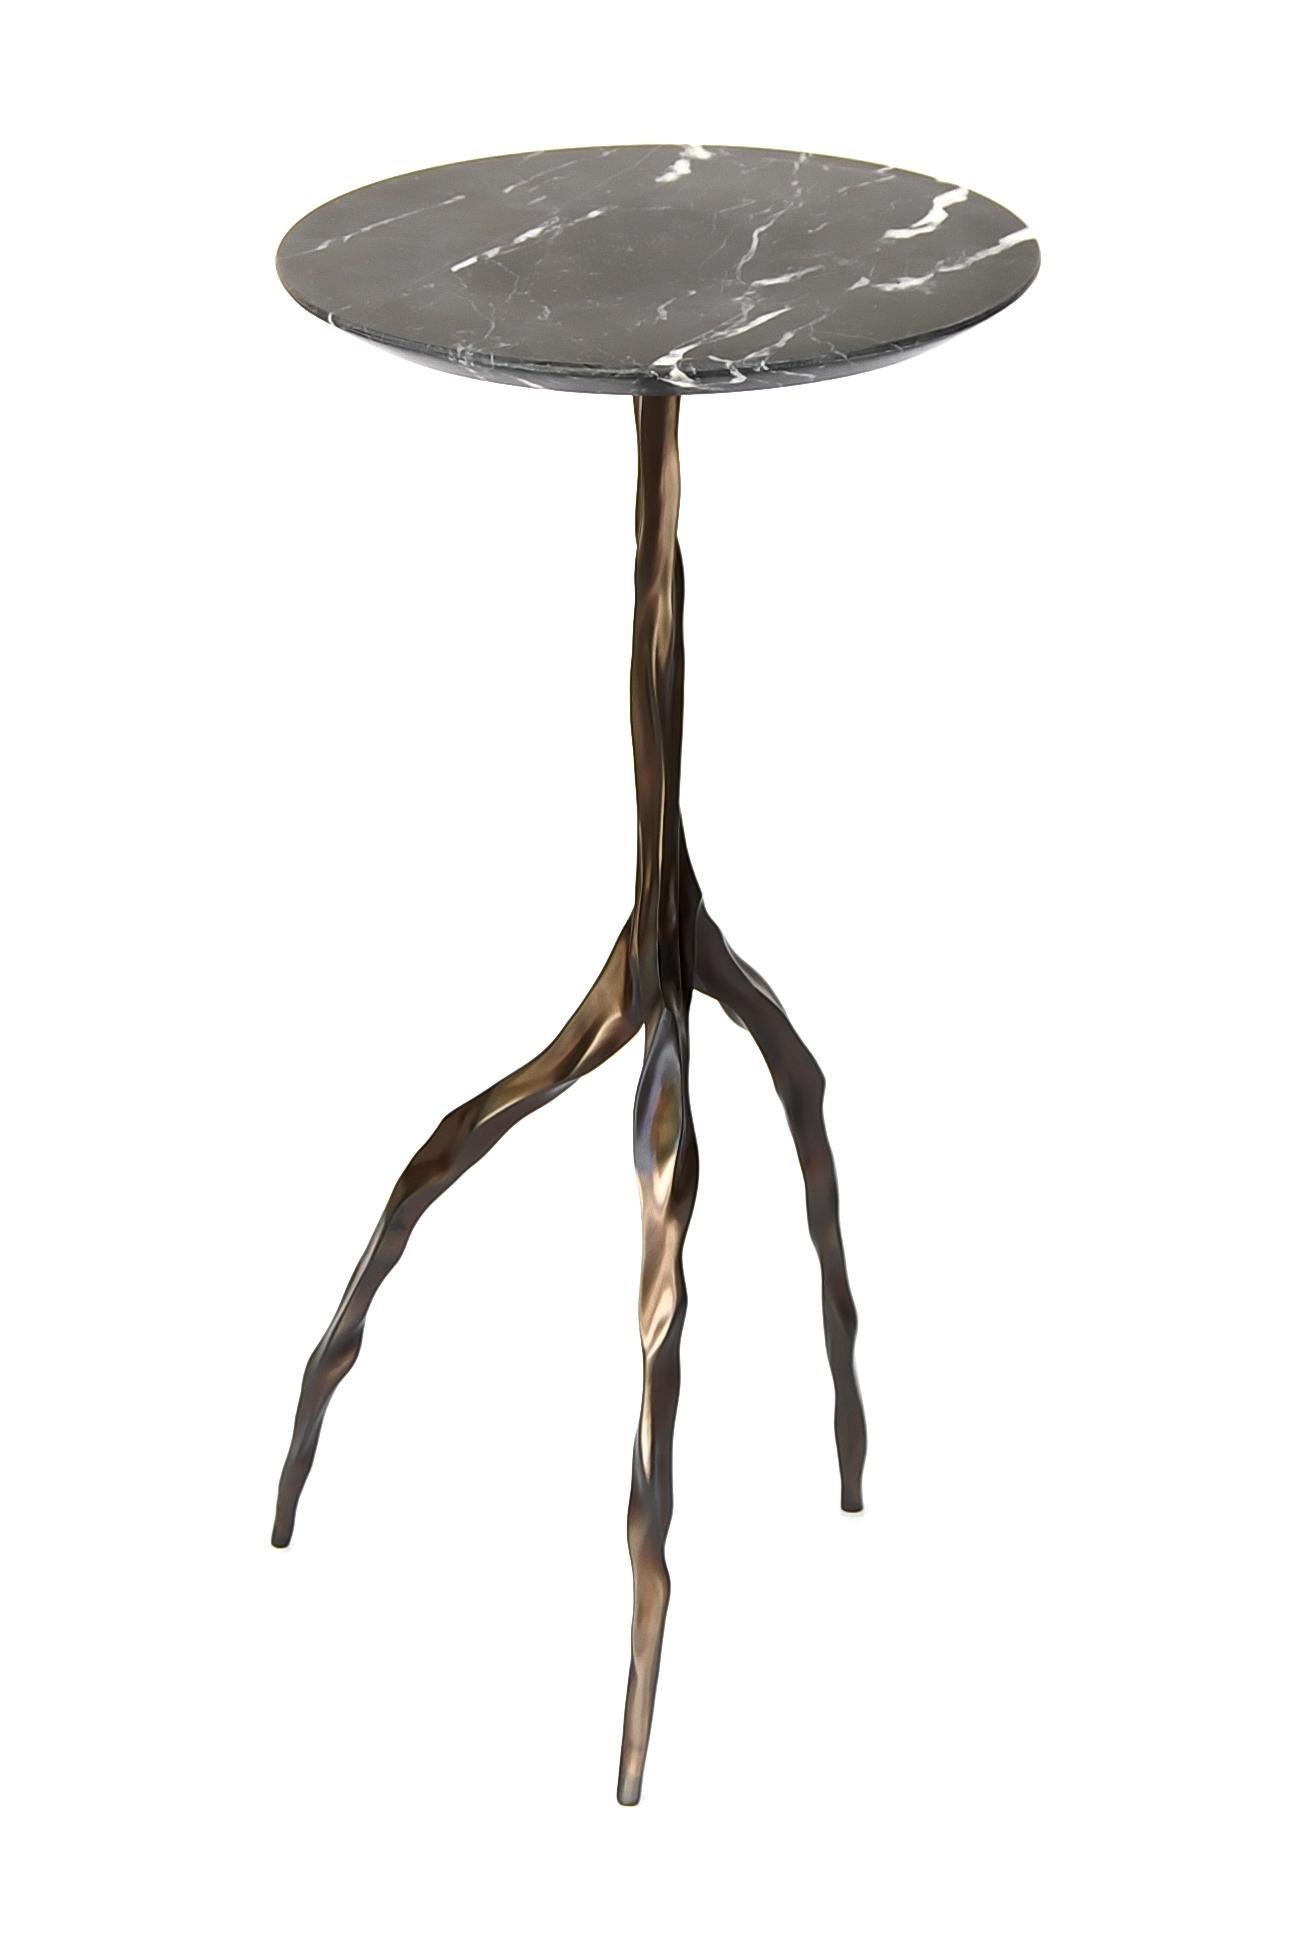 Brazilian Nina Drink Table with Nero Marquina Marble Top by Fakasaka Design For Sale